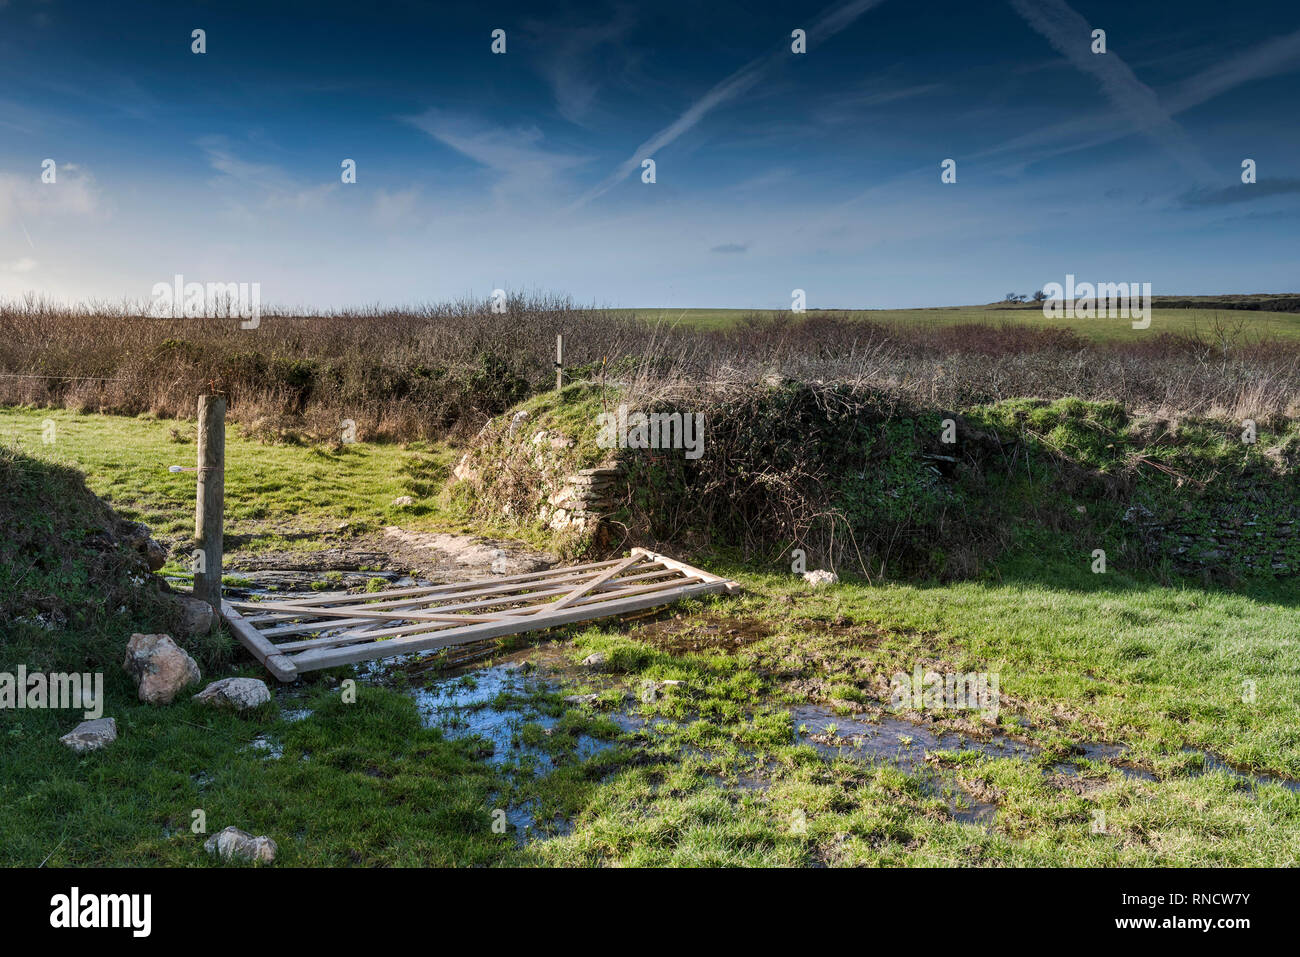 A five bar wooden gate fallen on the ground in a field. Stock Photo